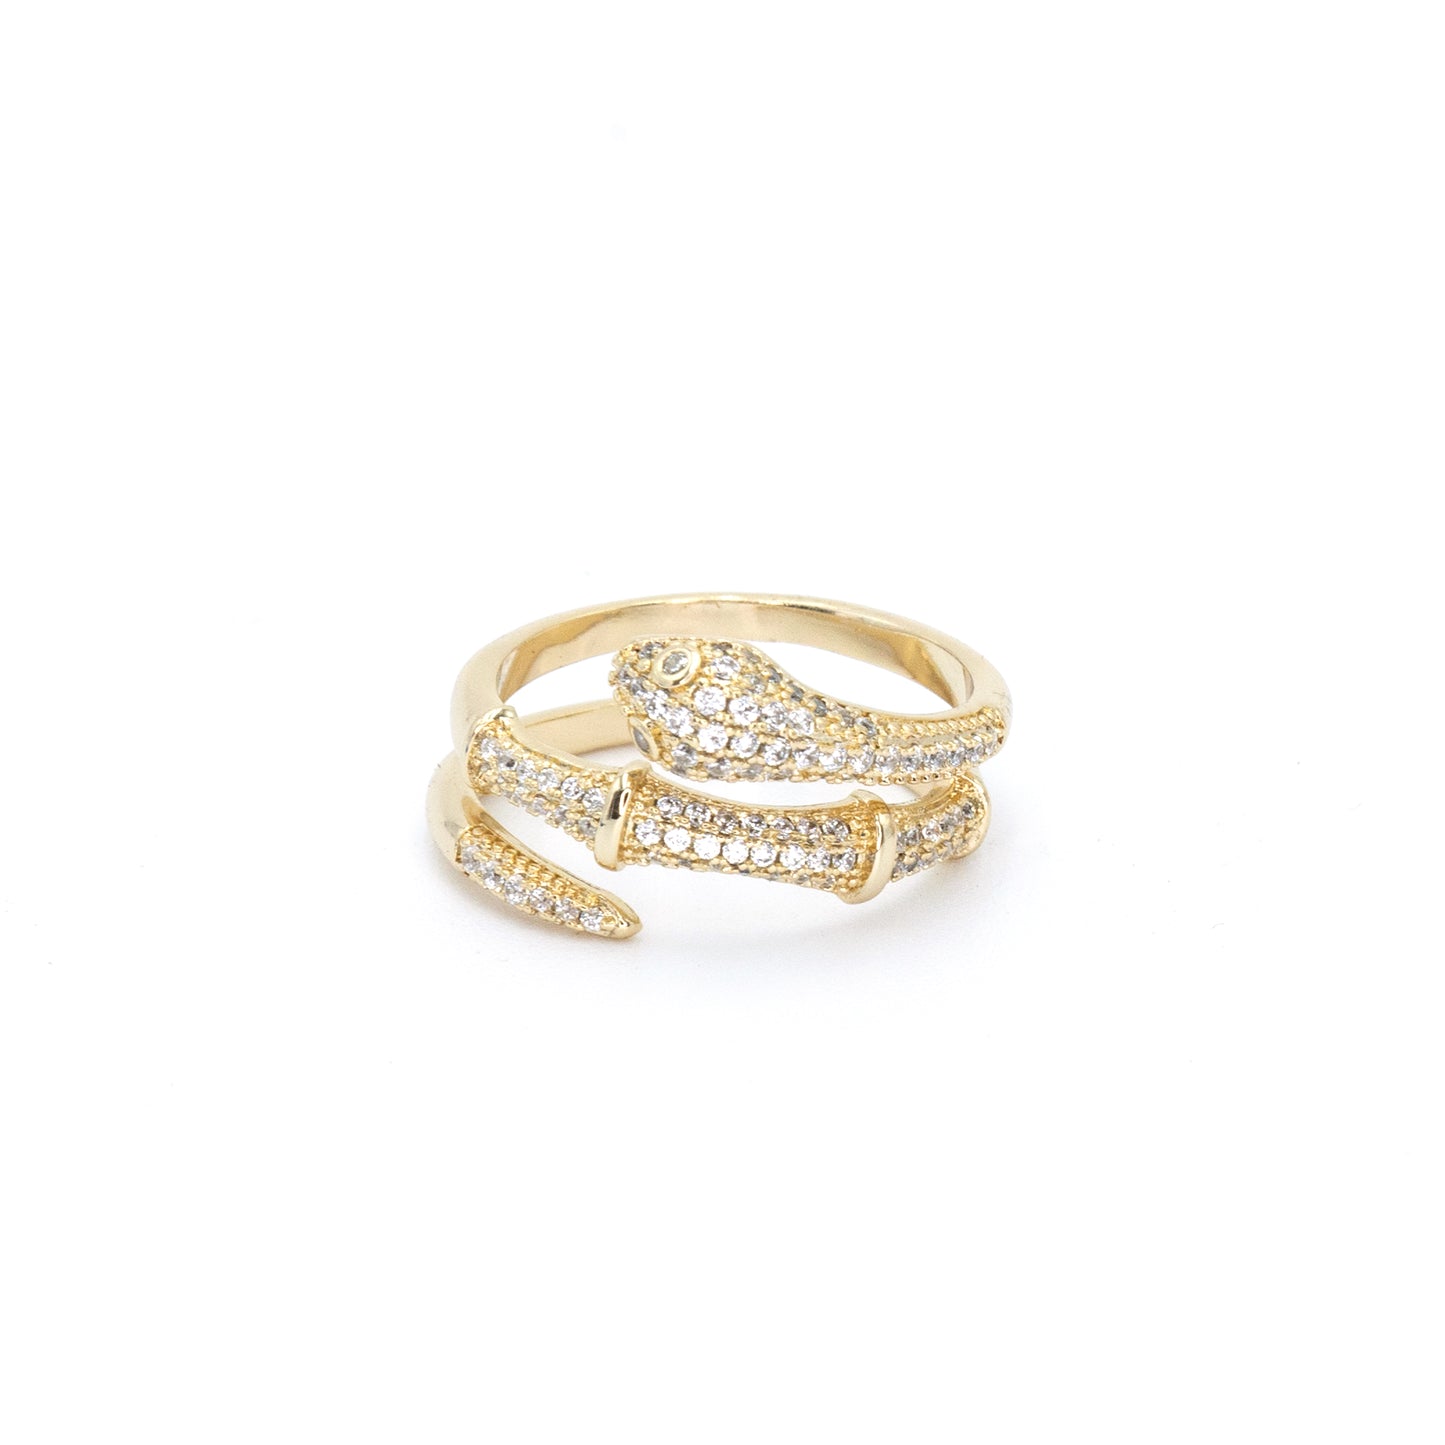 The Snake wrap ring